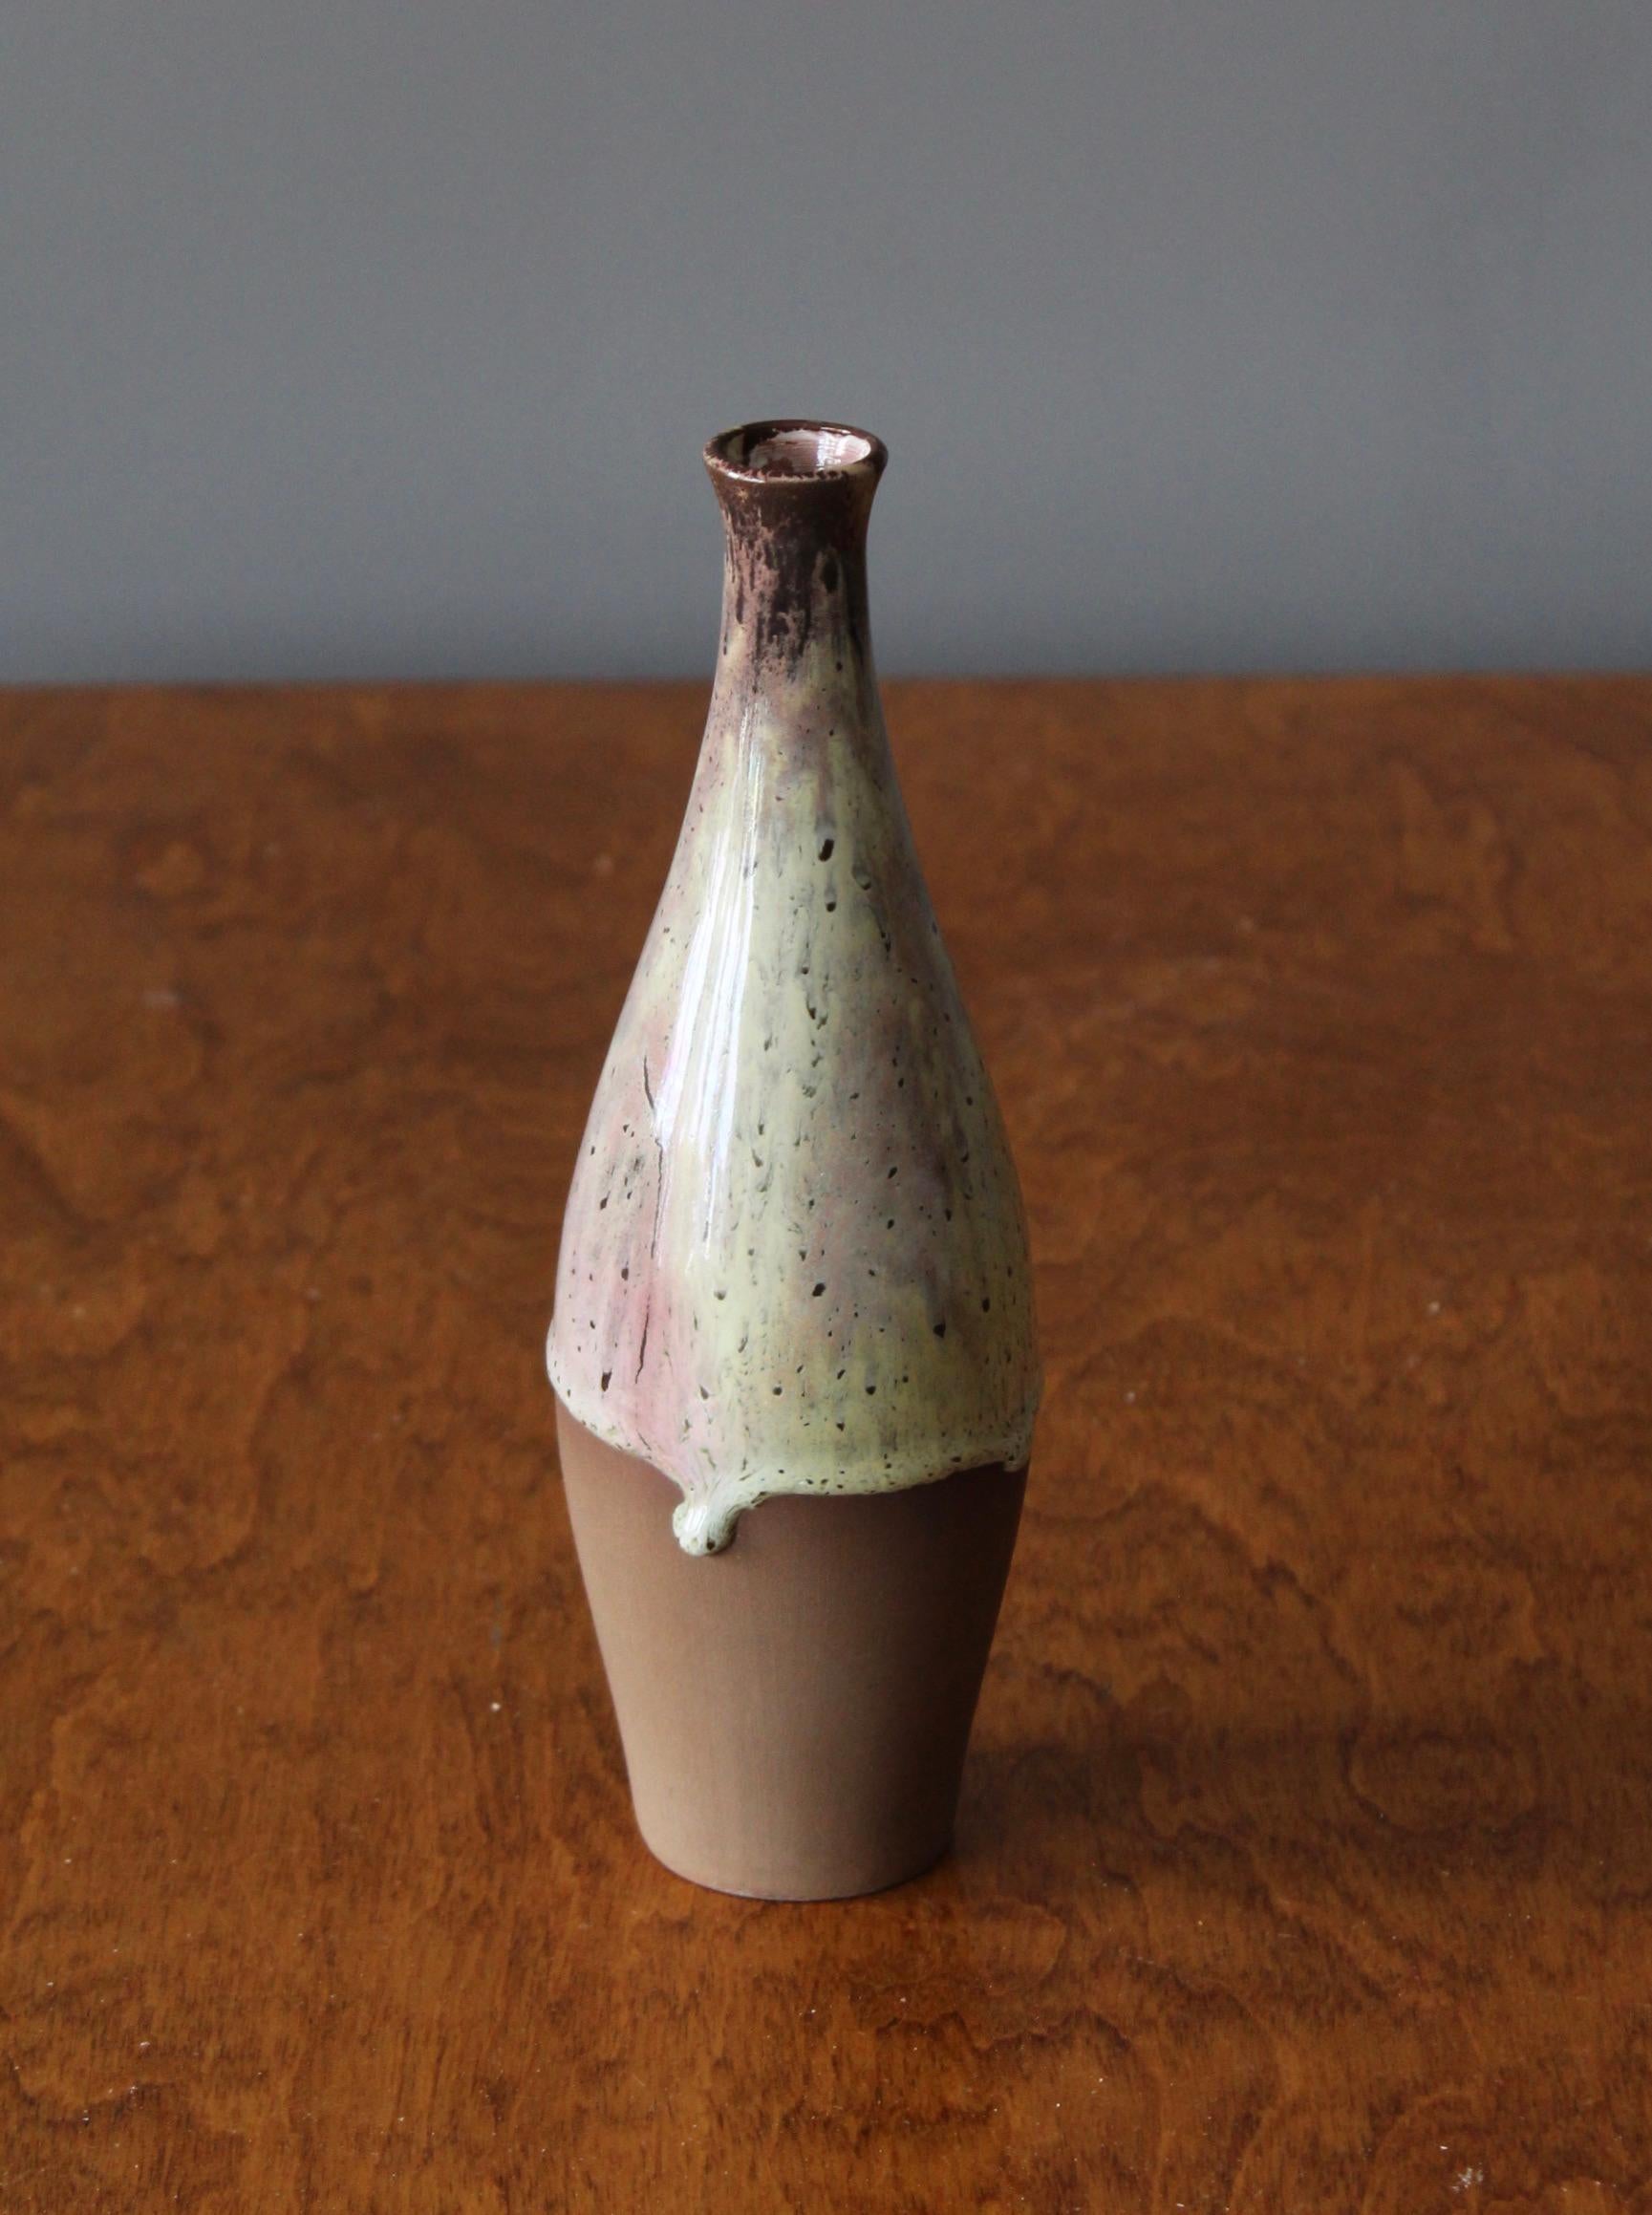 A vase, produced by Sven Hofverberg in his own studio, Landskrona, Sweden, 1970s. Signed. 

Other designers of the period include Lucie Rie, Carl Harry Stålhane, Hans Cooper, and Saxbo.